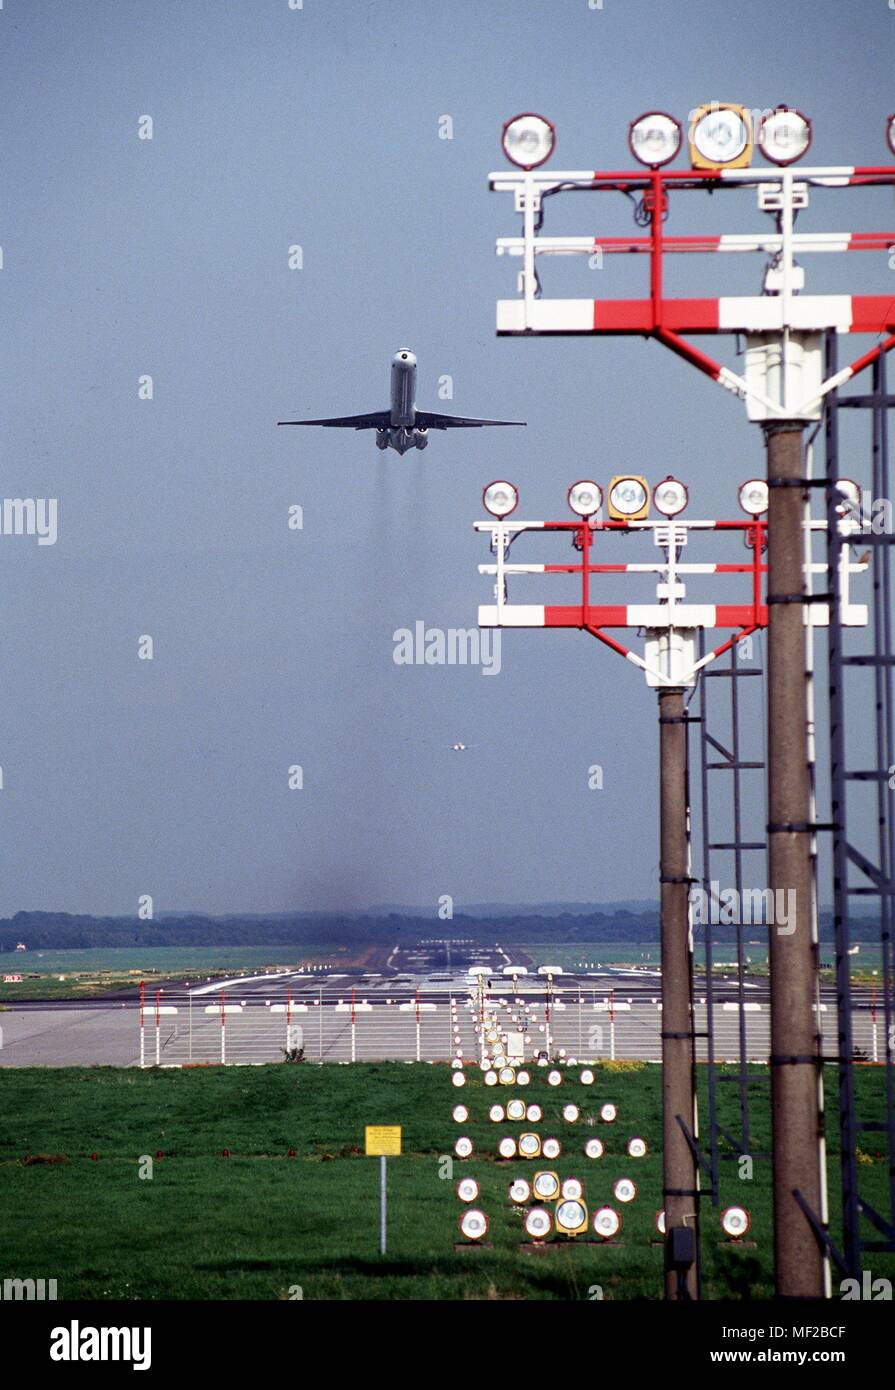 A plane flies at the start of the Dusseldorf airport via lighting systems. Taken on 6.9.1994. | usage worldwide Stock Photo